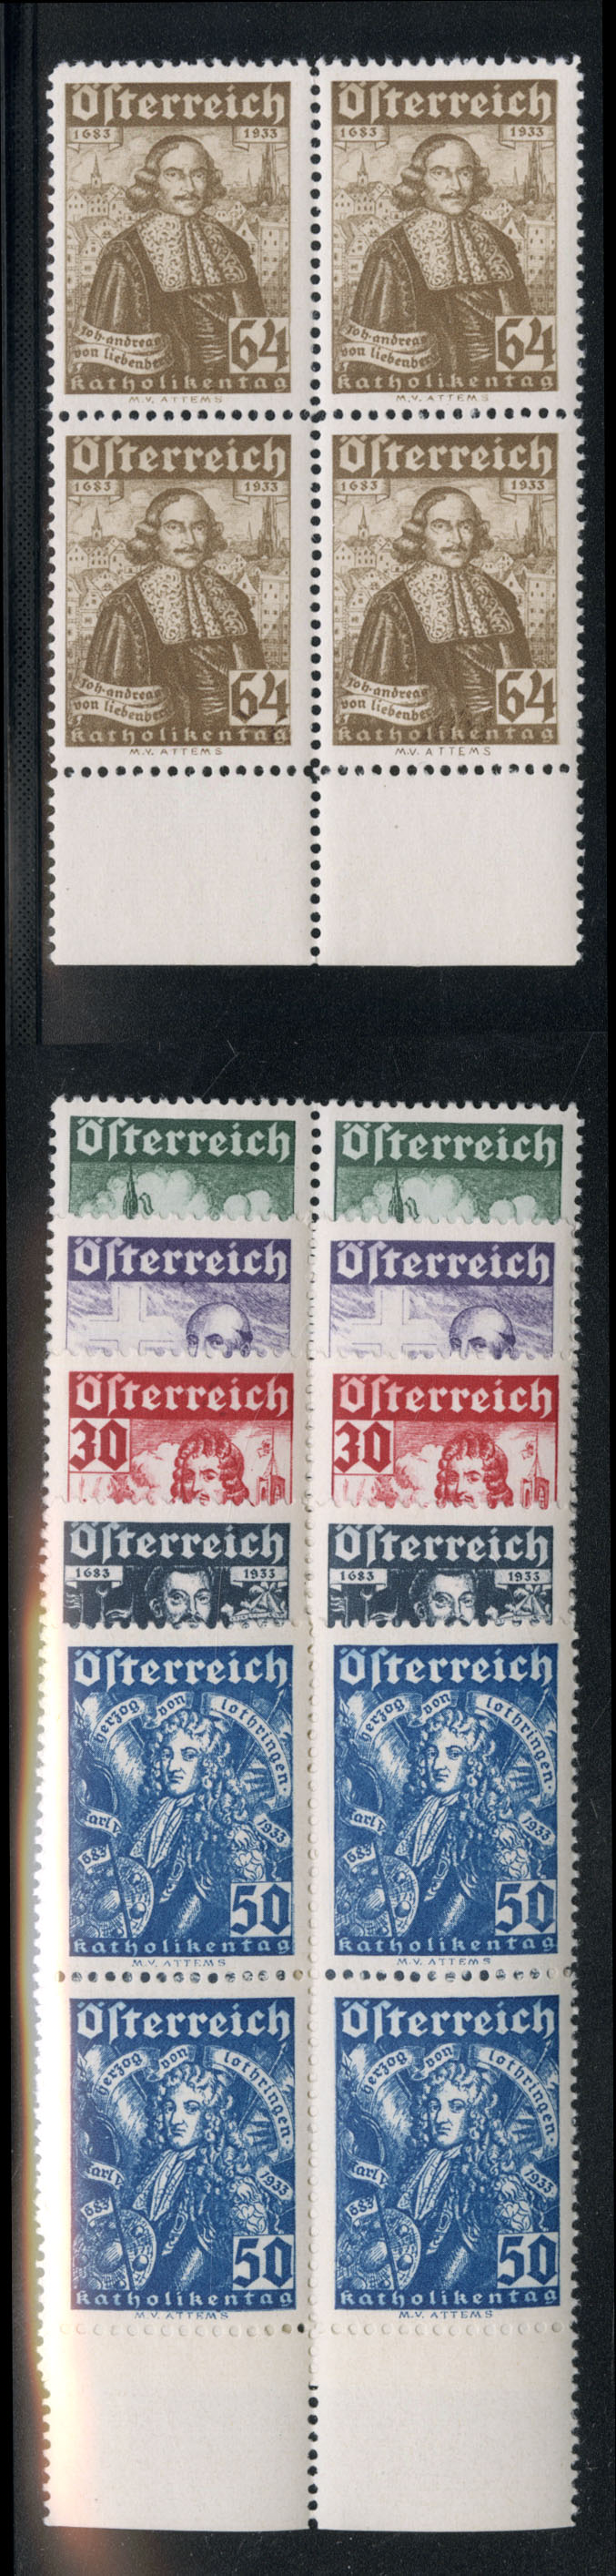 Lot 264 - BRAZIL  Zeppelin Flights  -  Cherrystone Auctions Worldwide Rare Stamps and Postal History